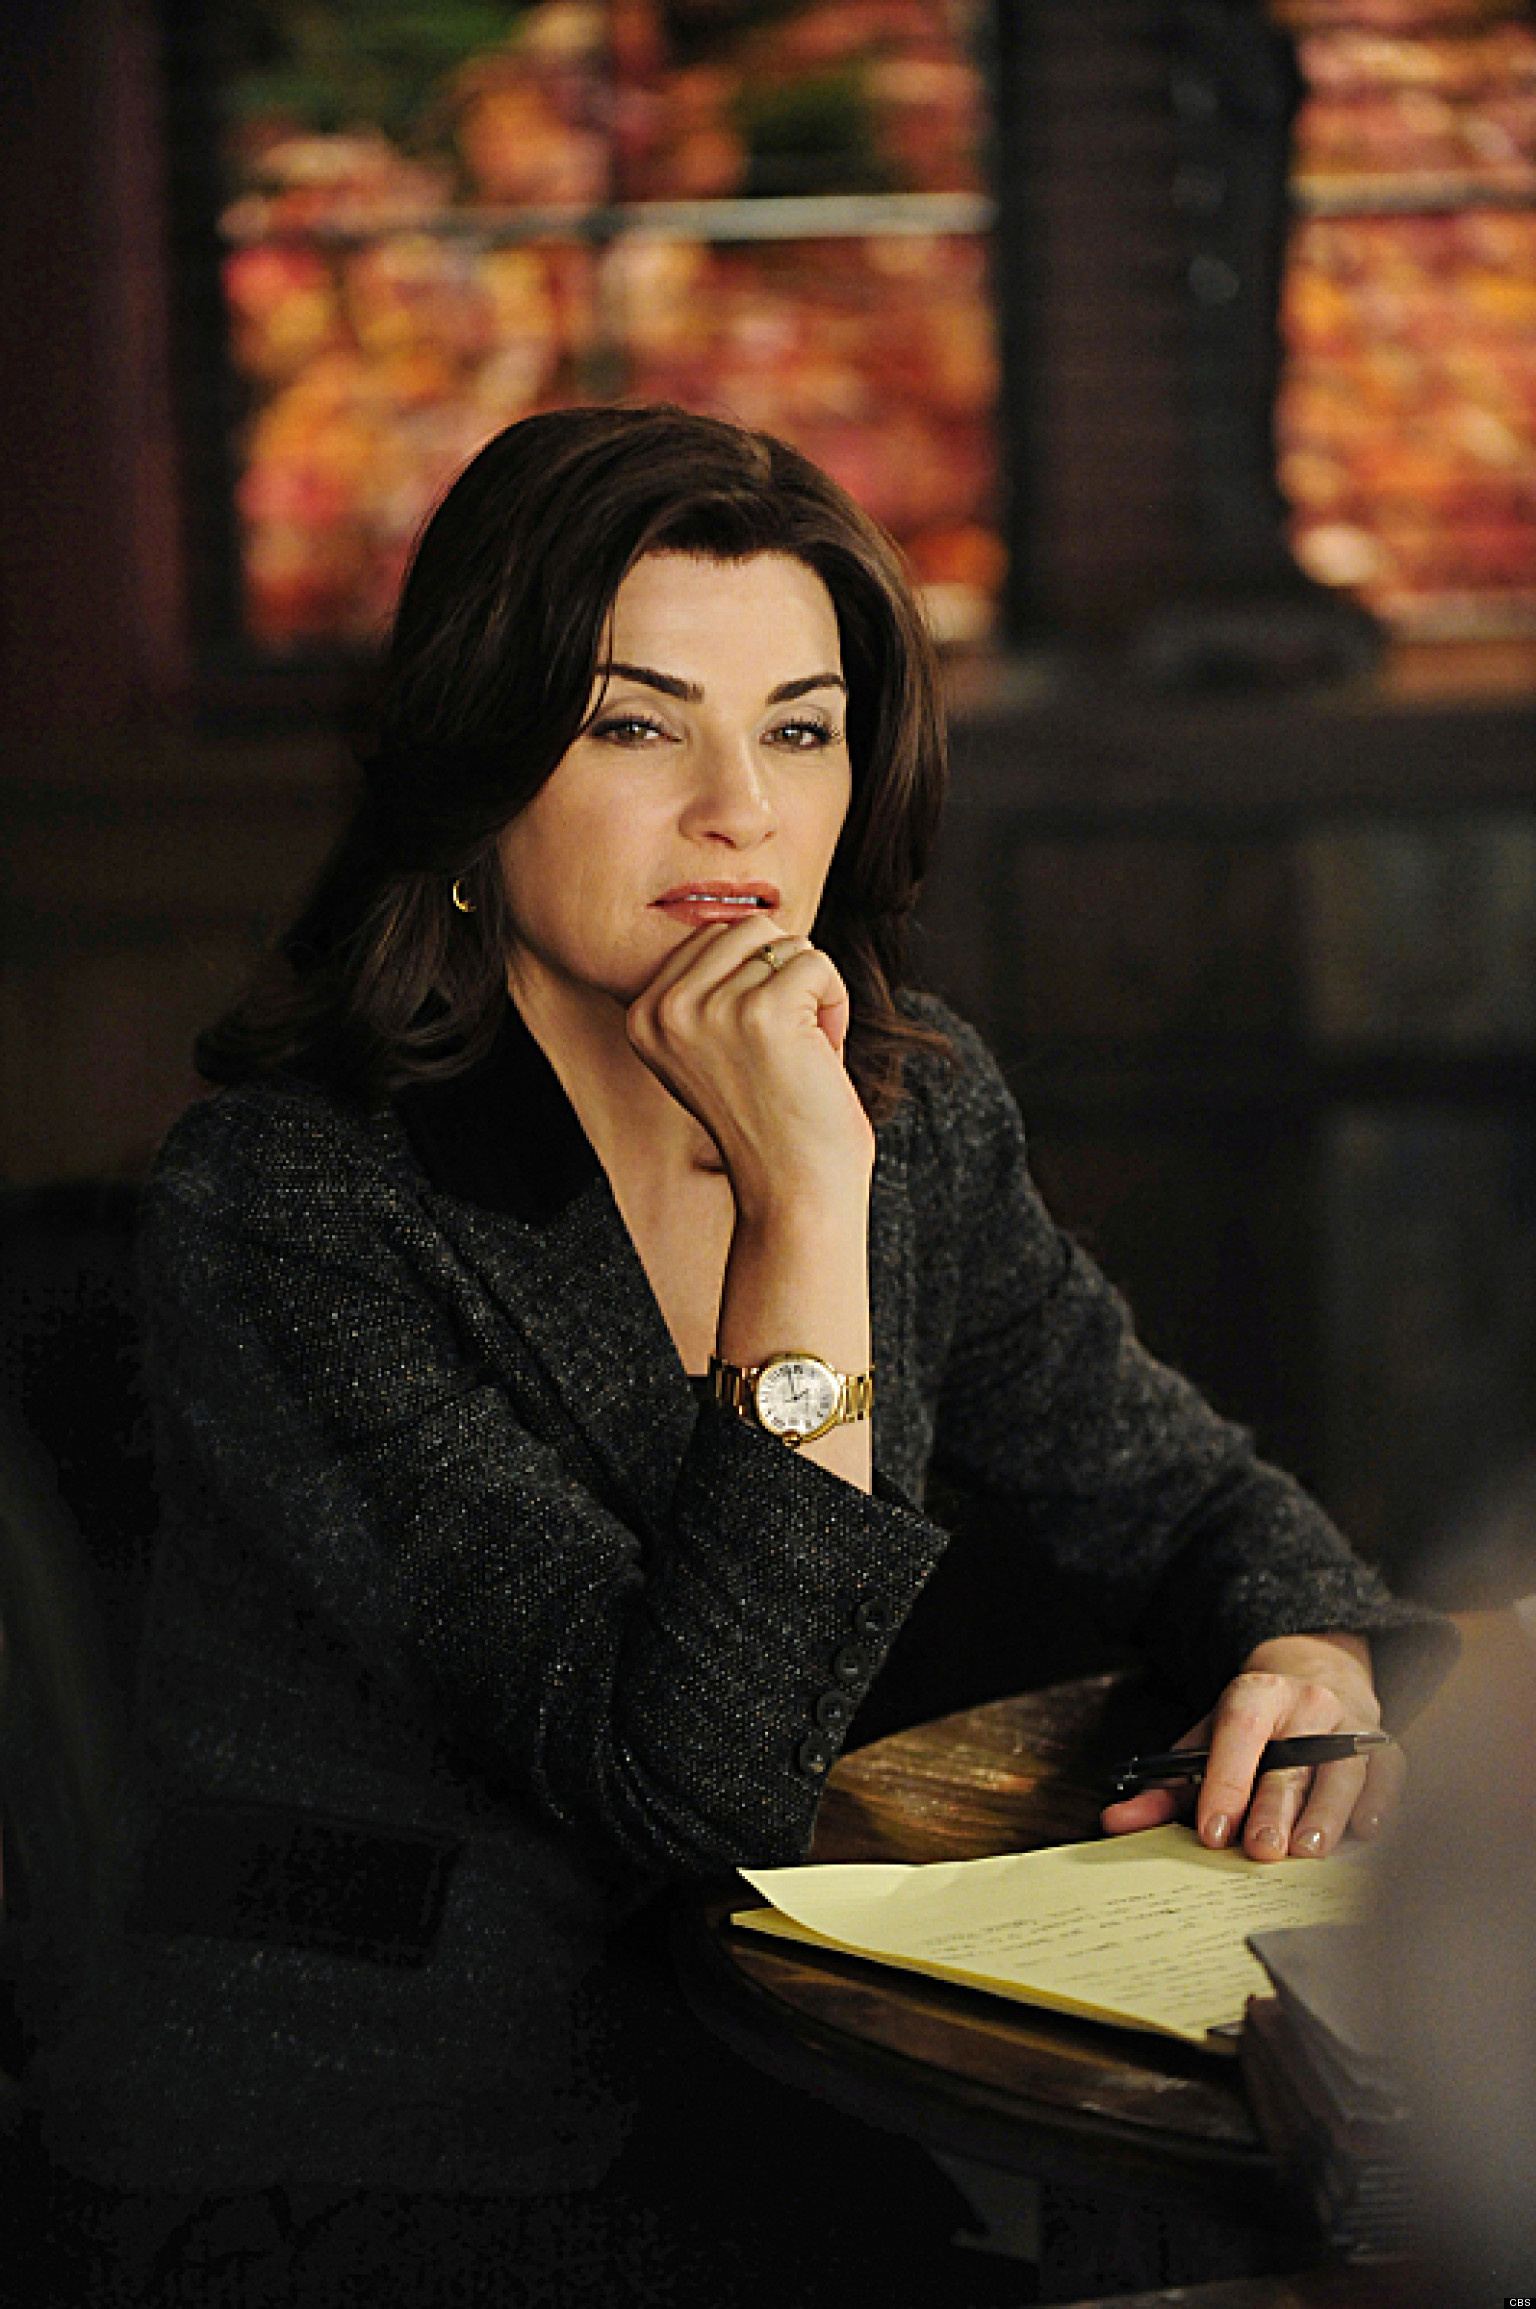 The Good Wife (TV Series): Alicia Florrick, The wife of Peter, A disgraced State's Attorney, The law firm Stern, Lockhart and Gardner. 1540x2310 HD Wallpaper.